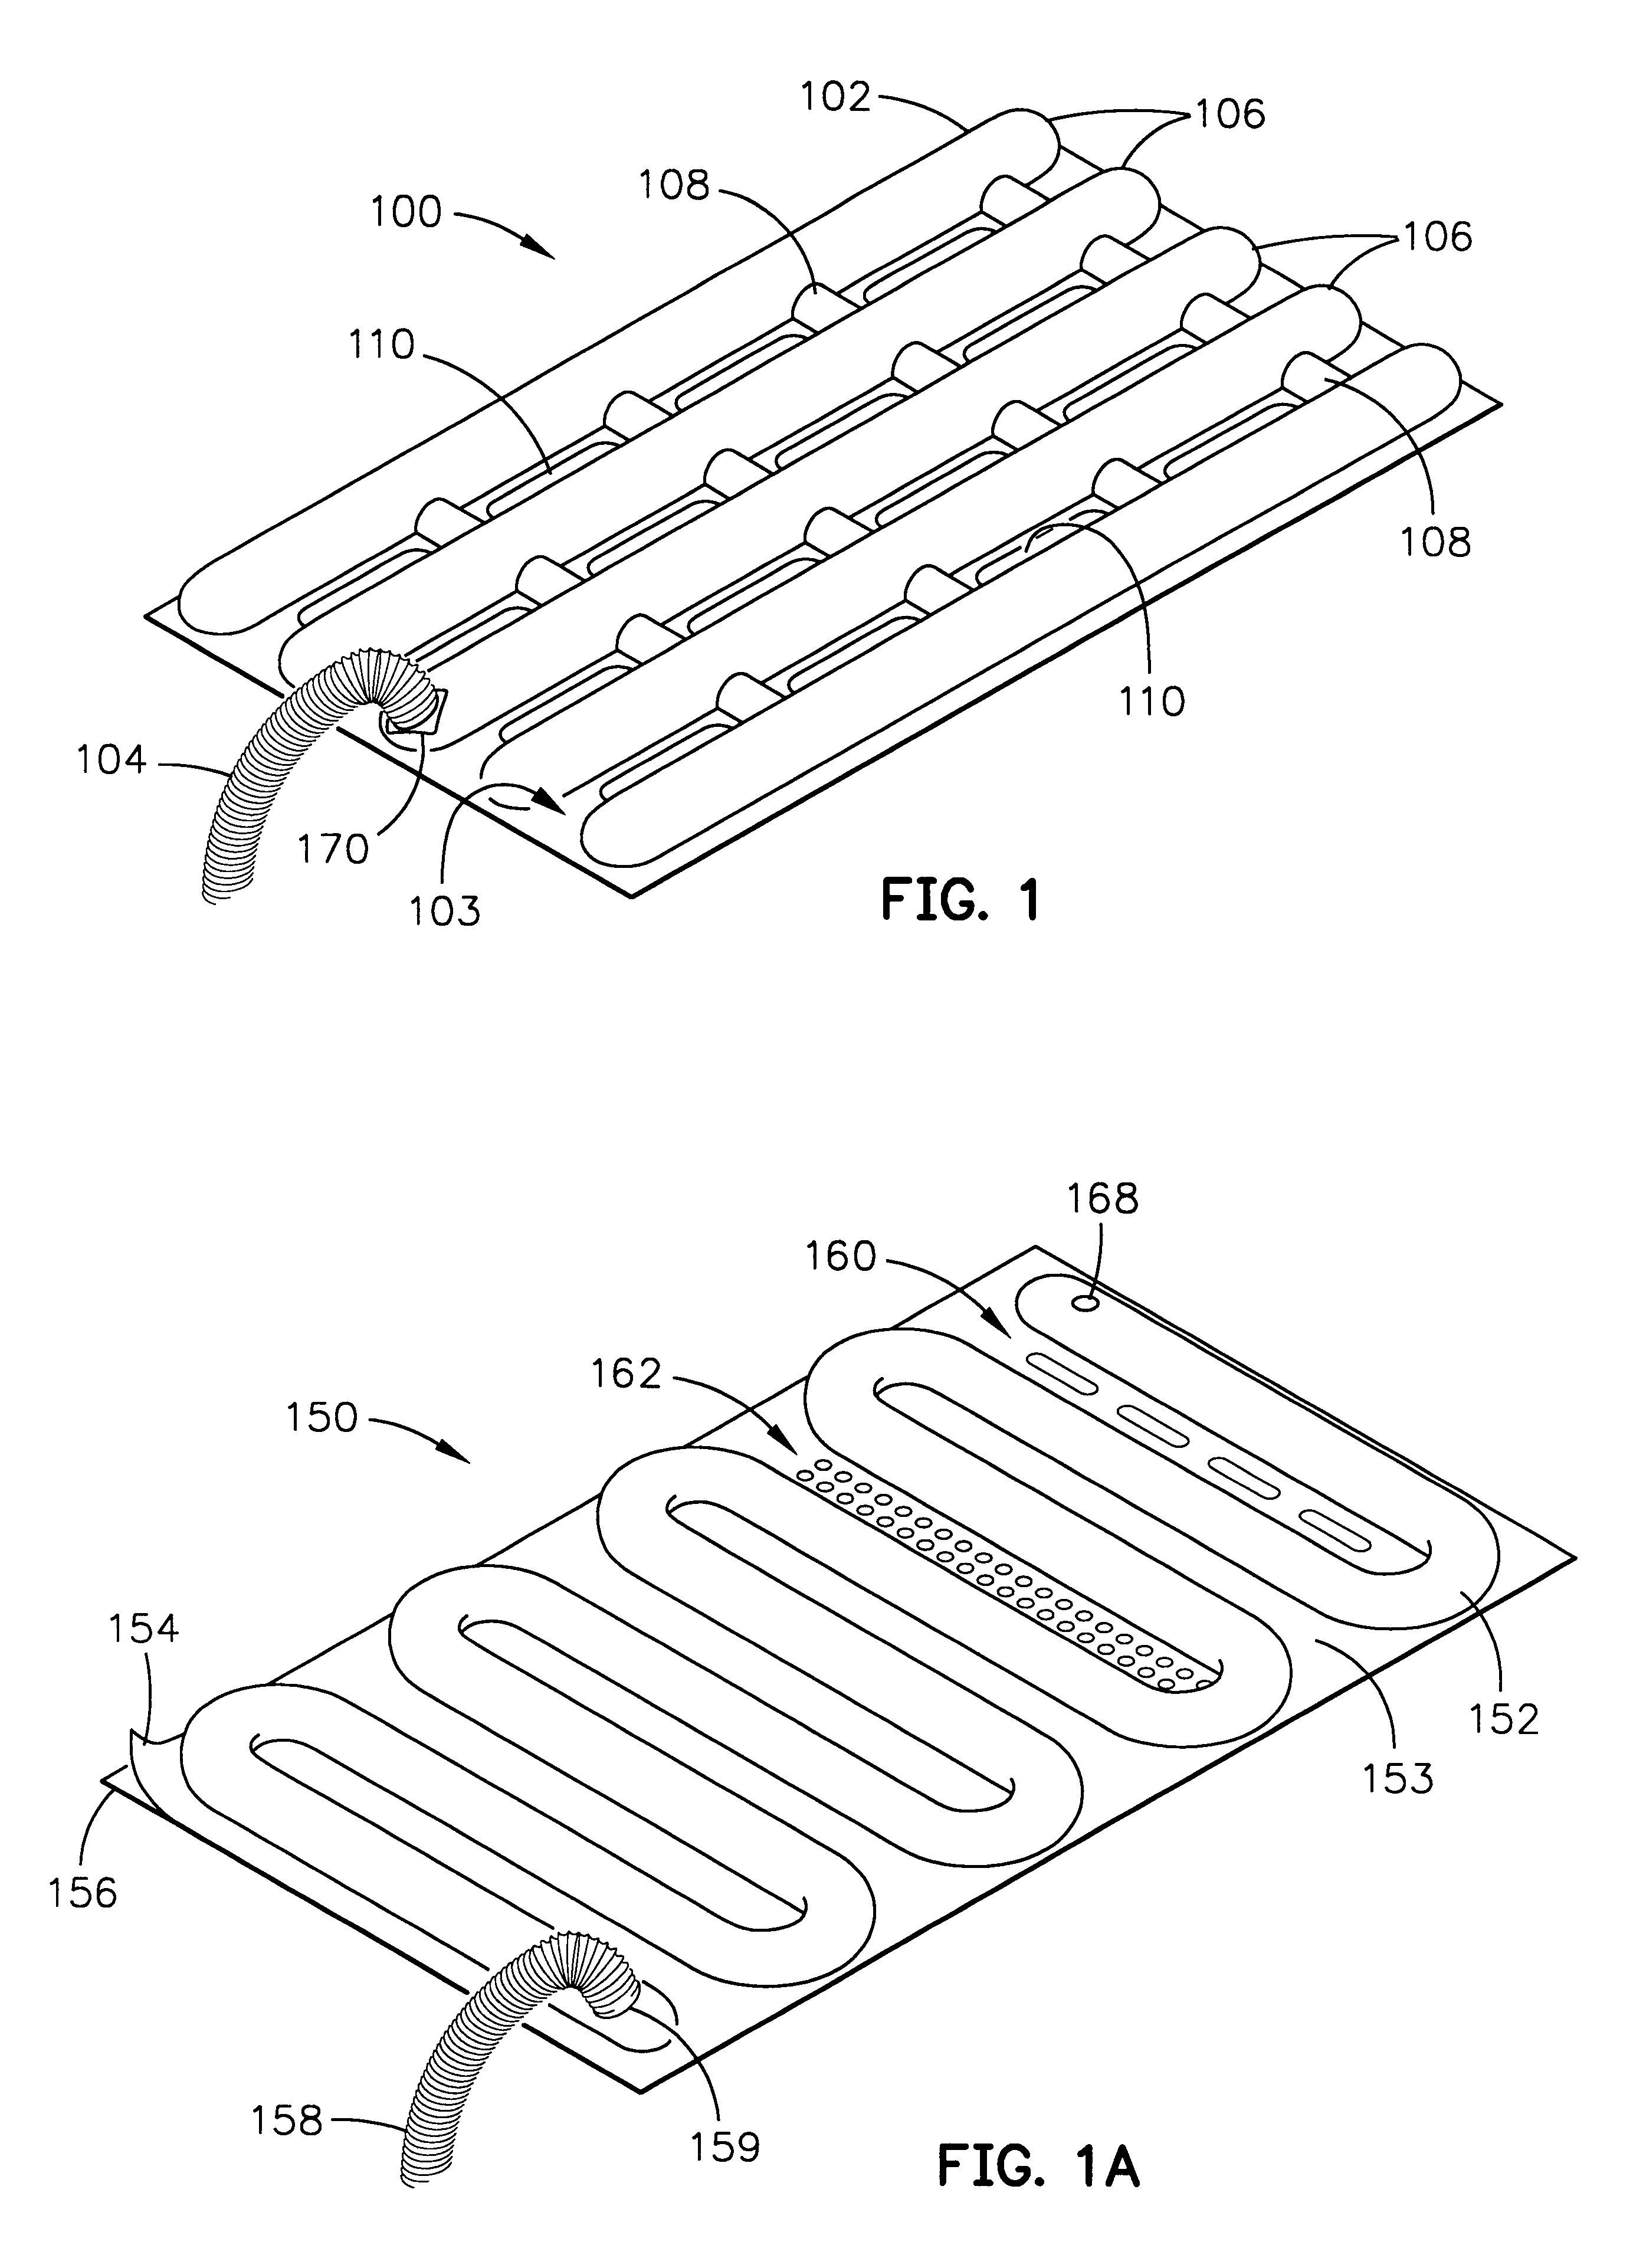 Cooling devices with high-efficiency cooling features